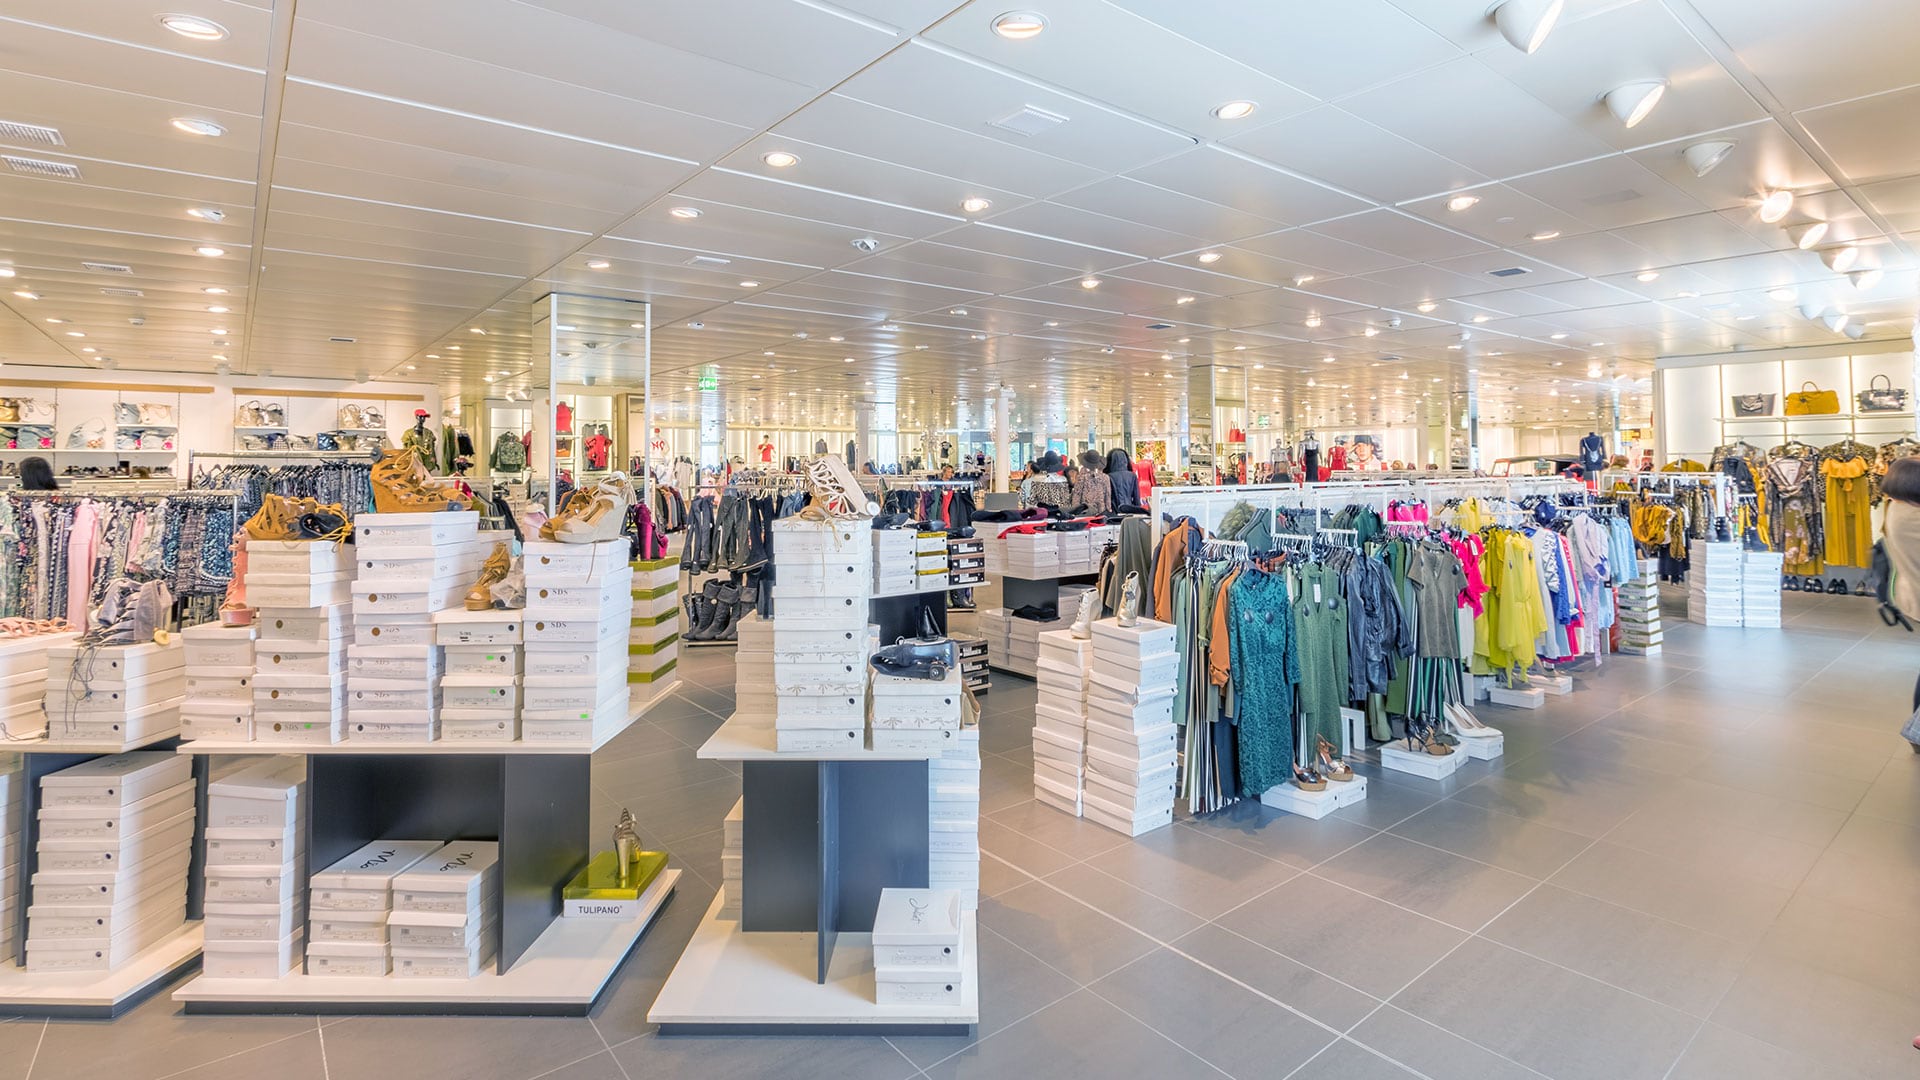 The retail environment demands changes due to COVID-19